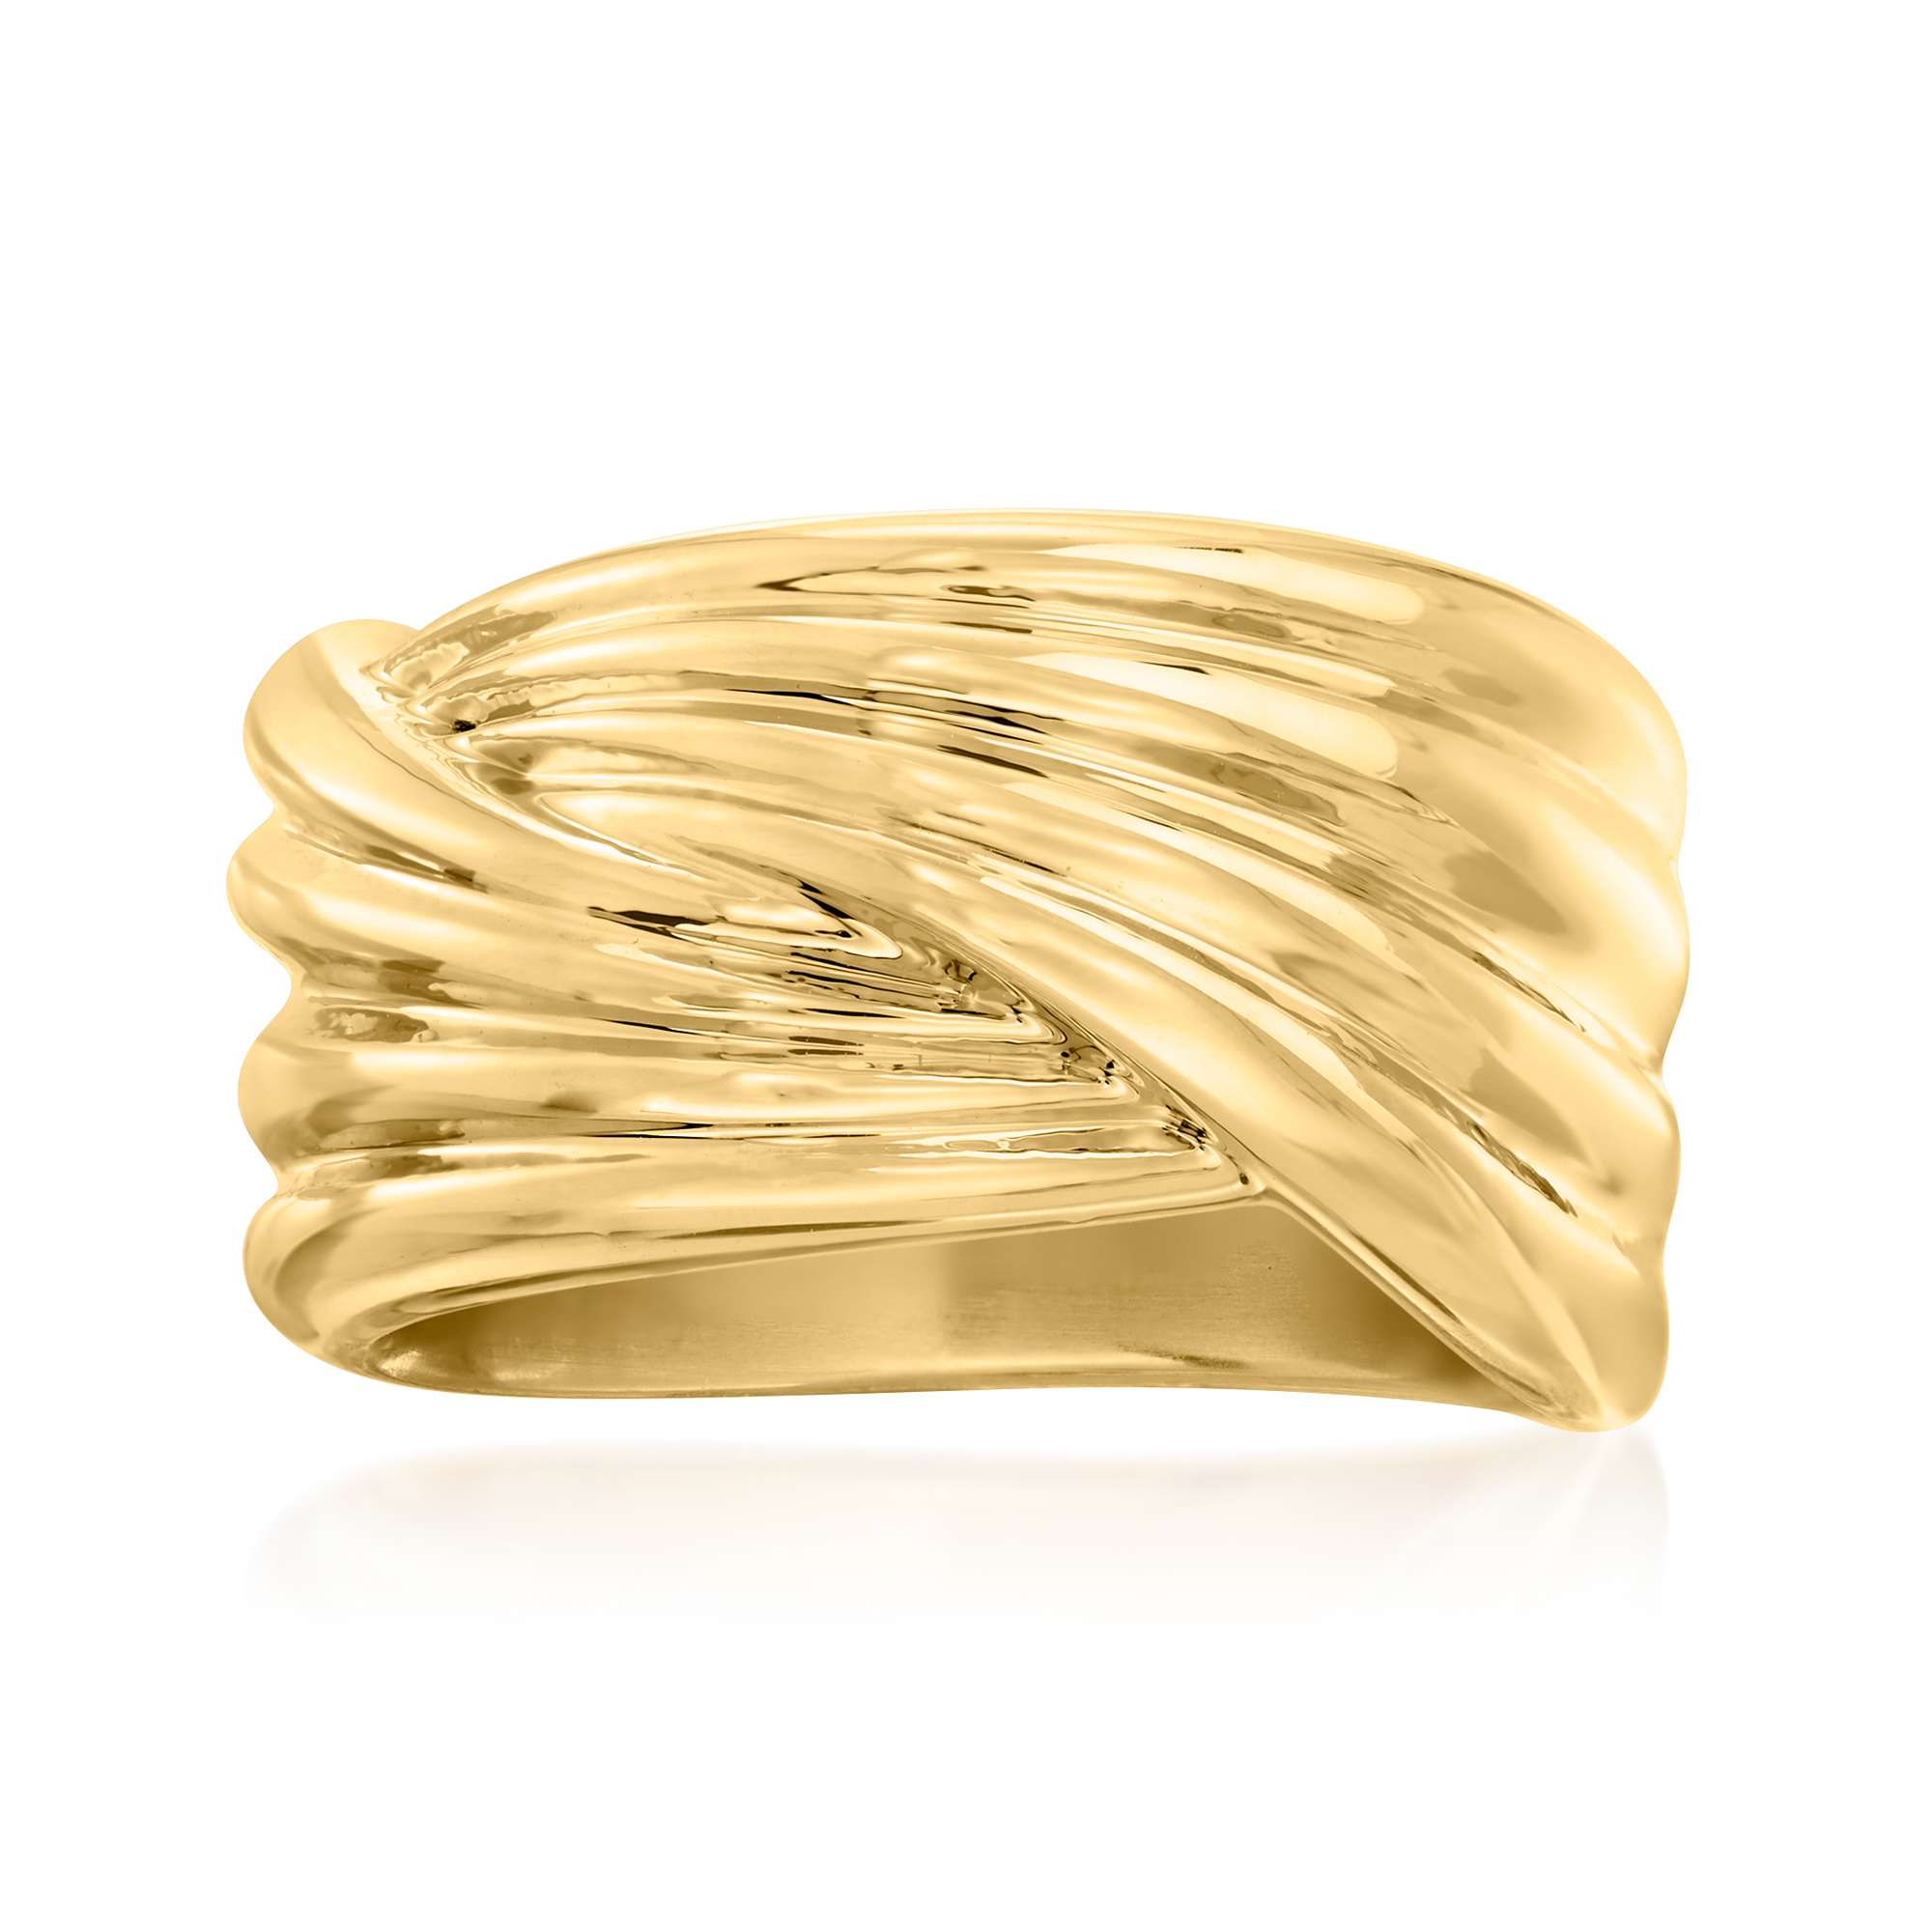 Italian Andiamo 14kt Yellow Gold Over Resin Crossover Ring